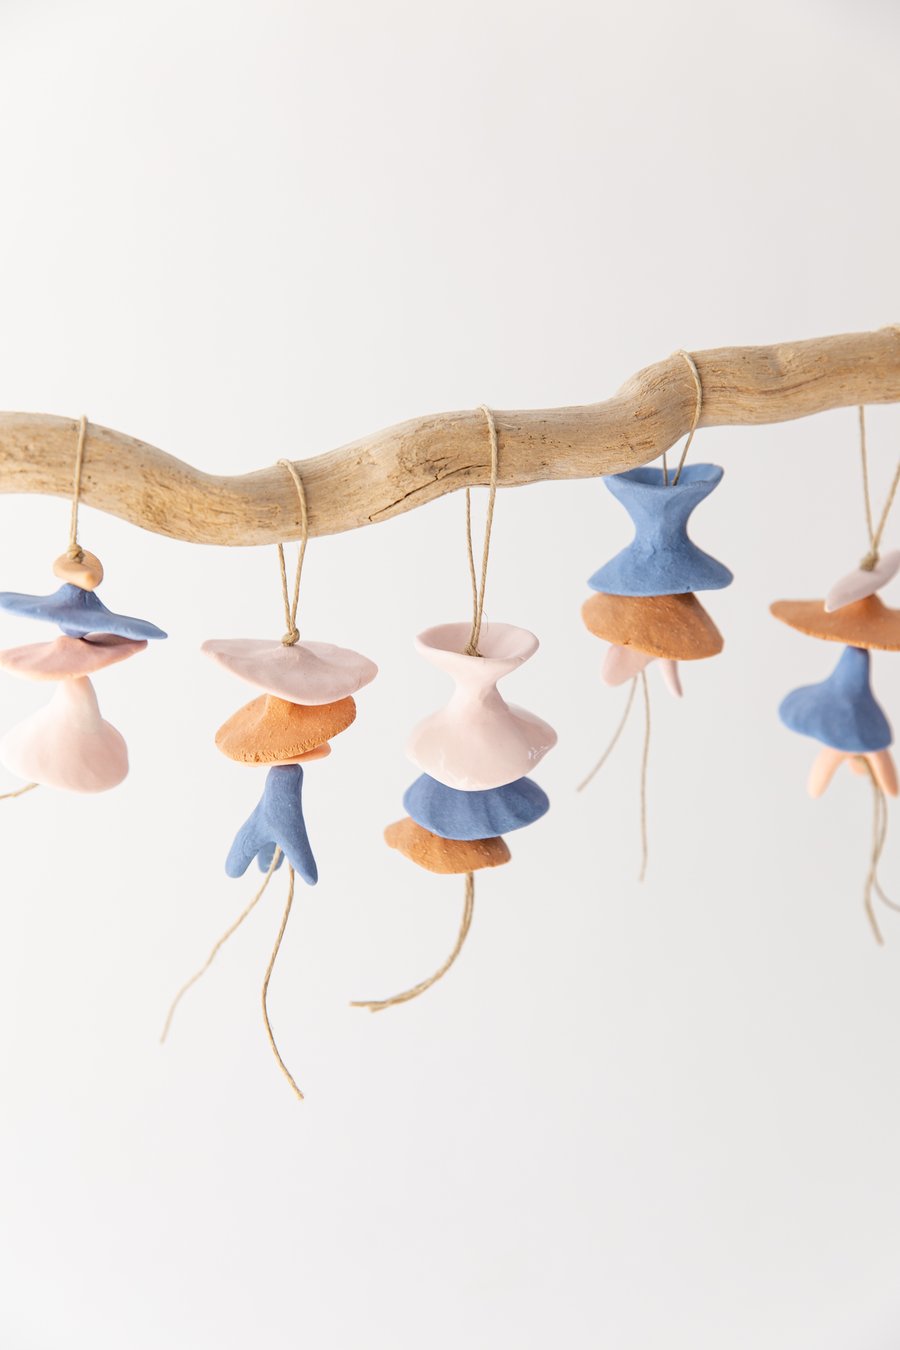 Image of Mini Floral Ornaments - Blue, Pink and Terracotta